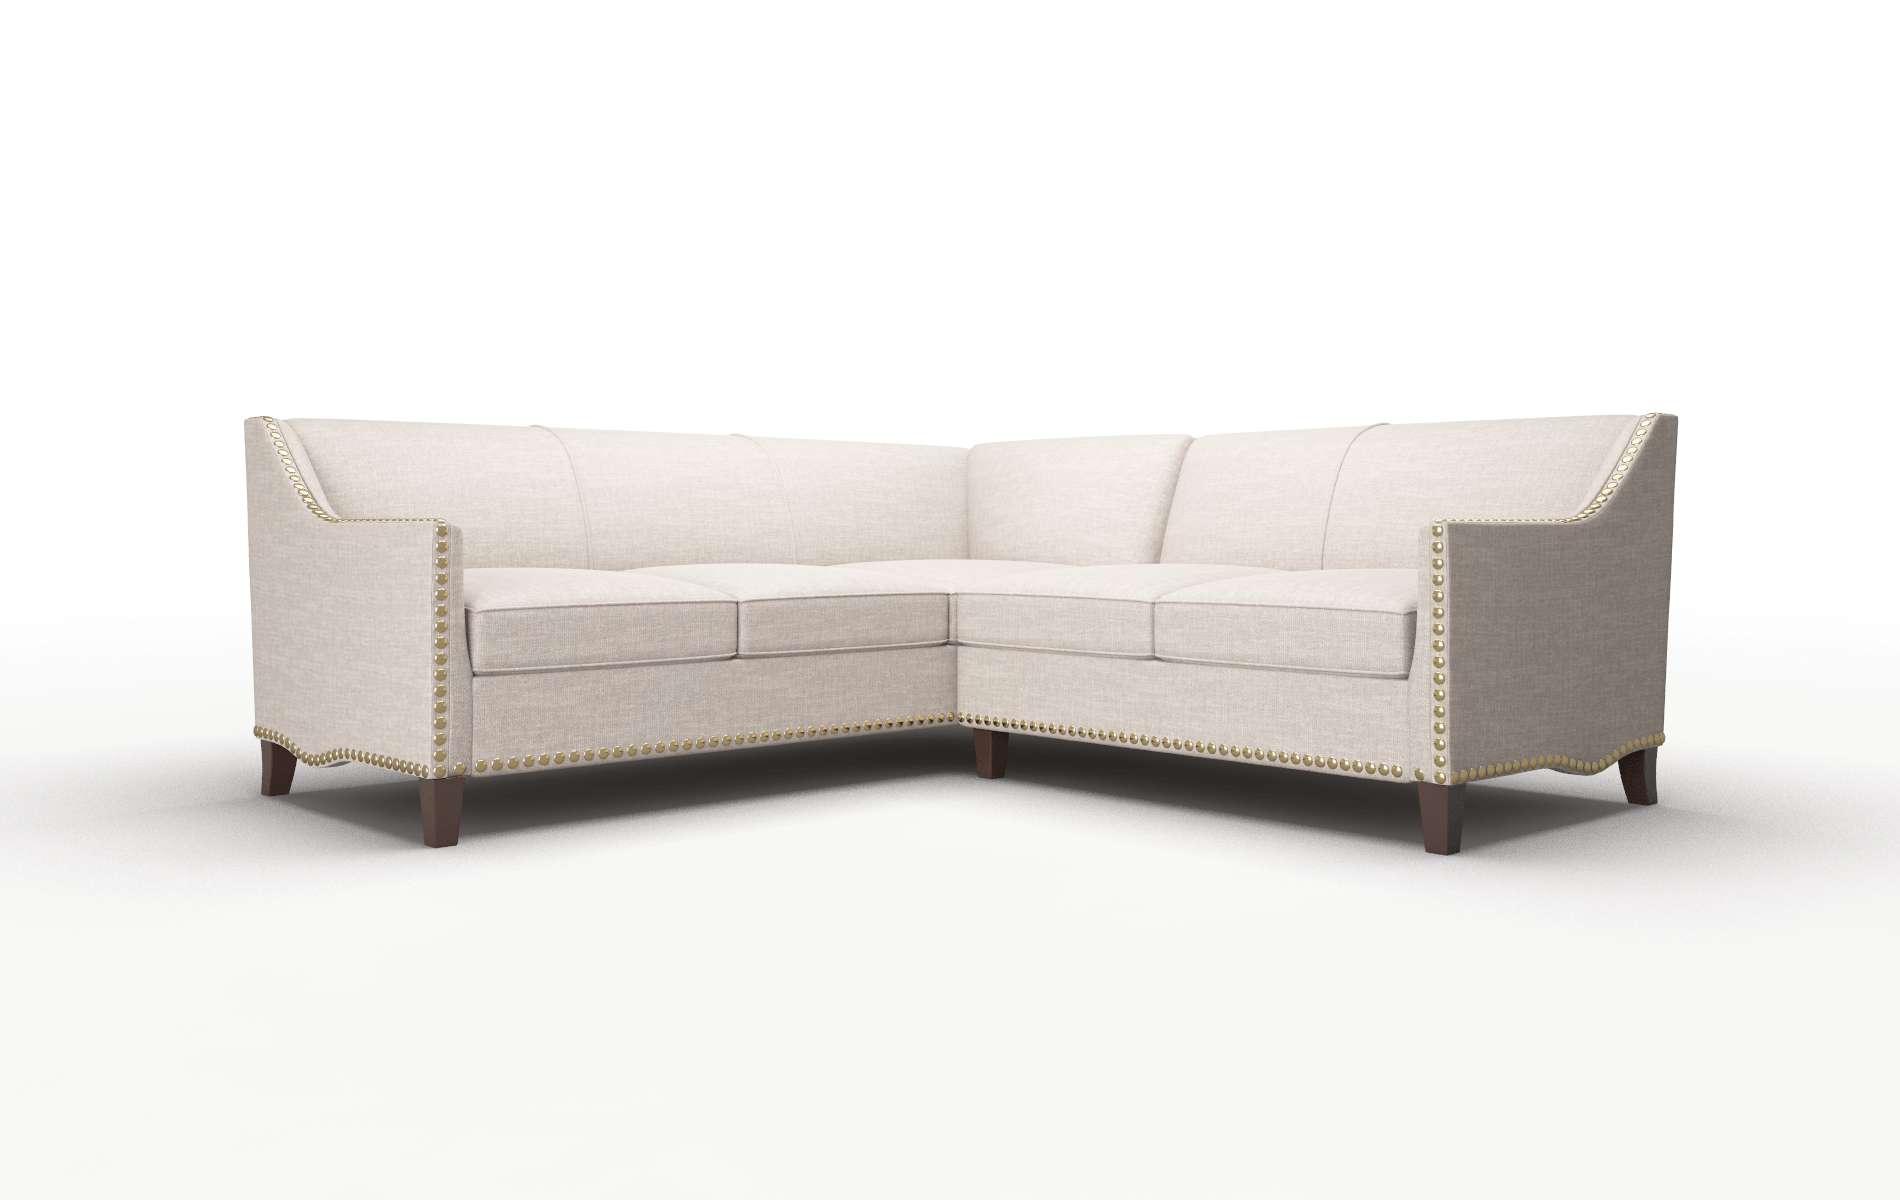 Amsterdam Clyde Dolphin Sectional espresso legs 1